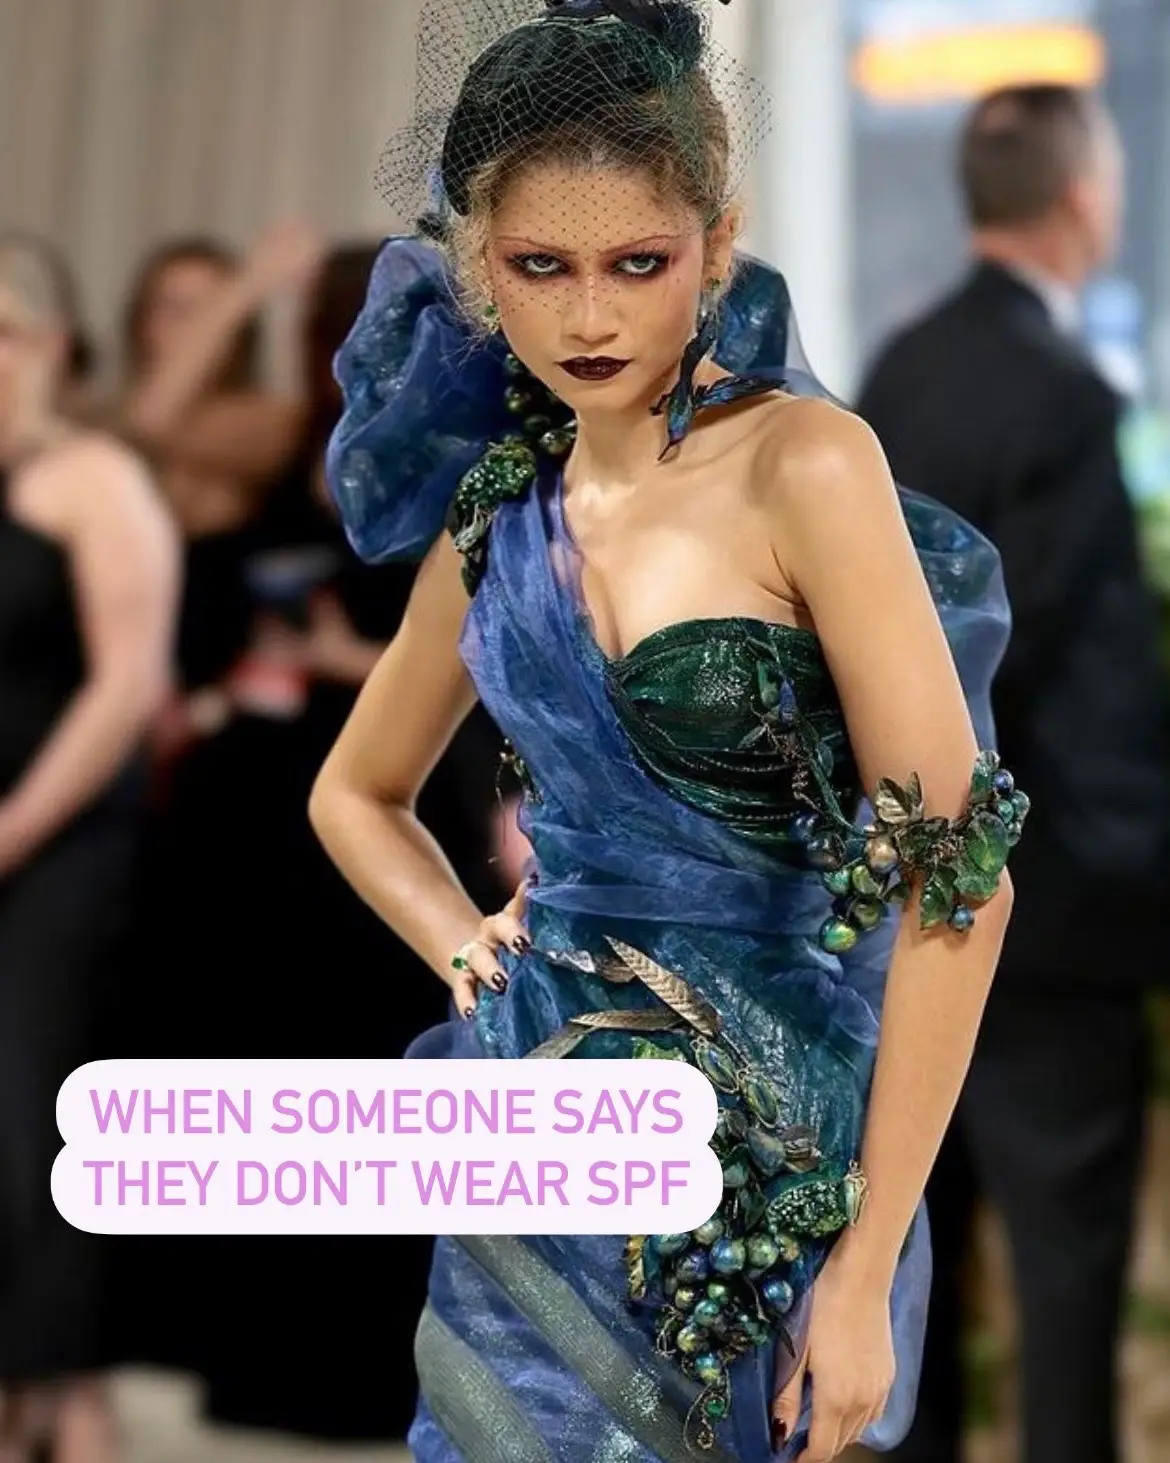 The celebs know when it comes to SPF 🧴 #nakedsundays #metgala #metgala2024  USE AS DIRECTED, reapply frequently